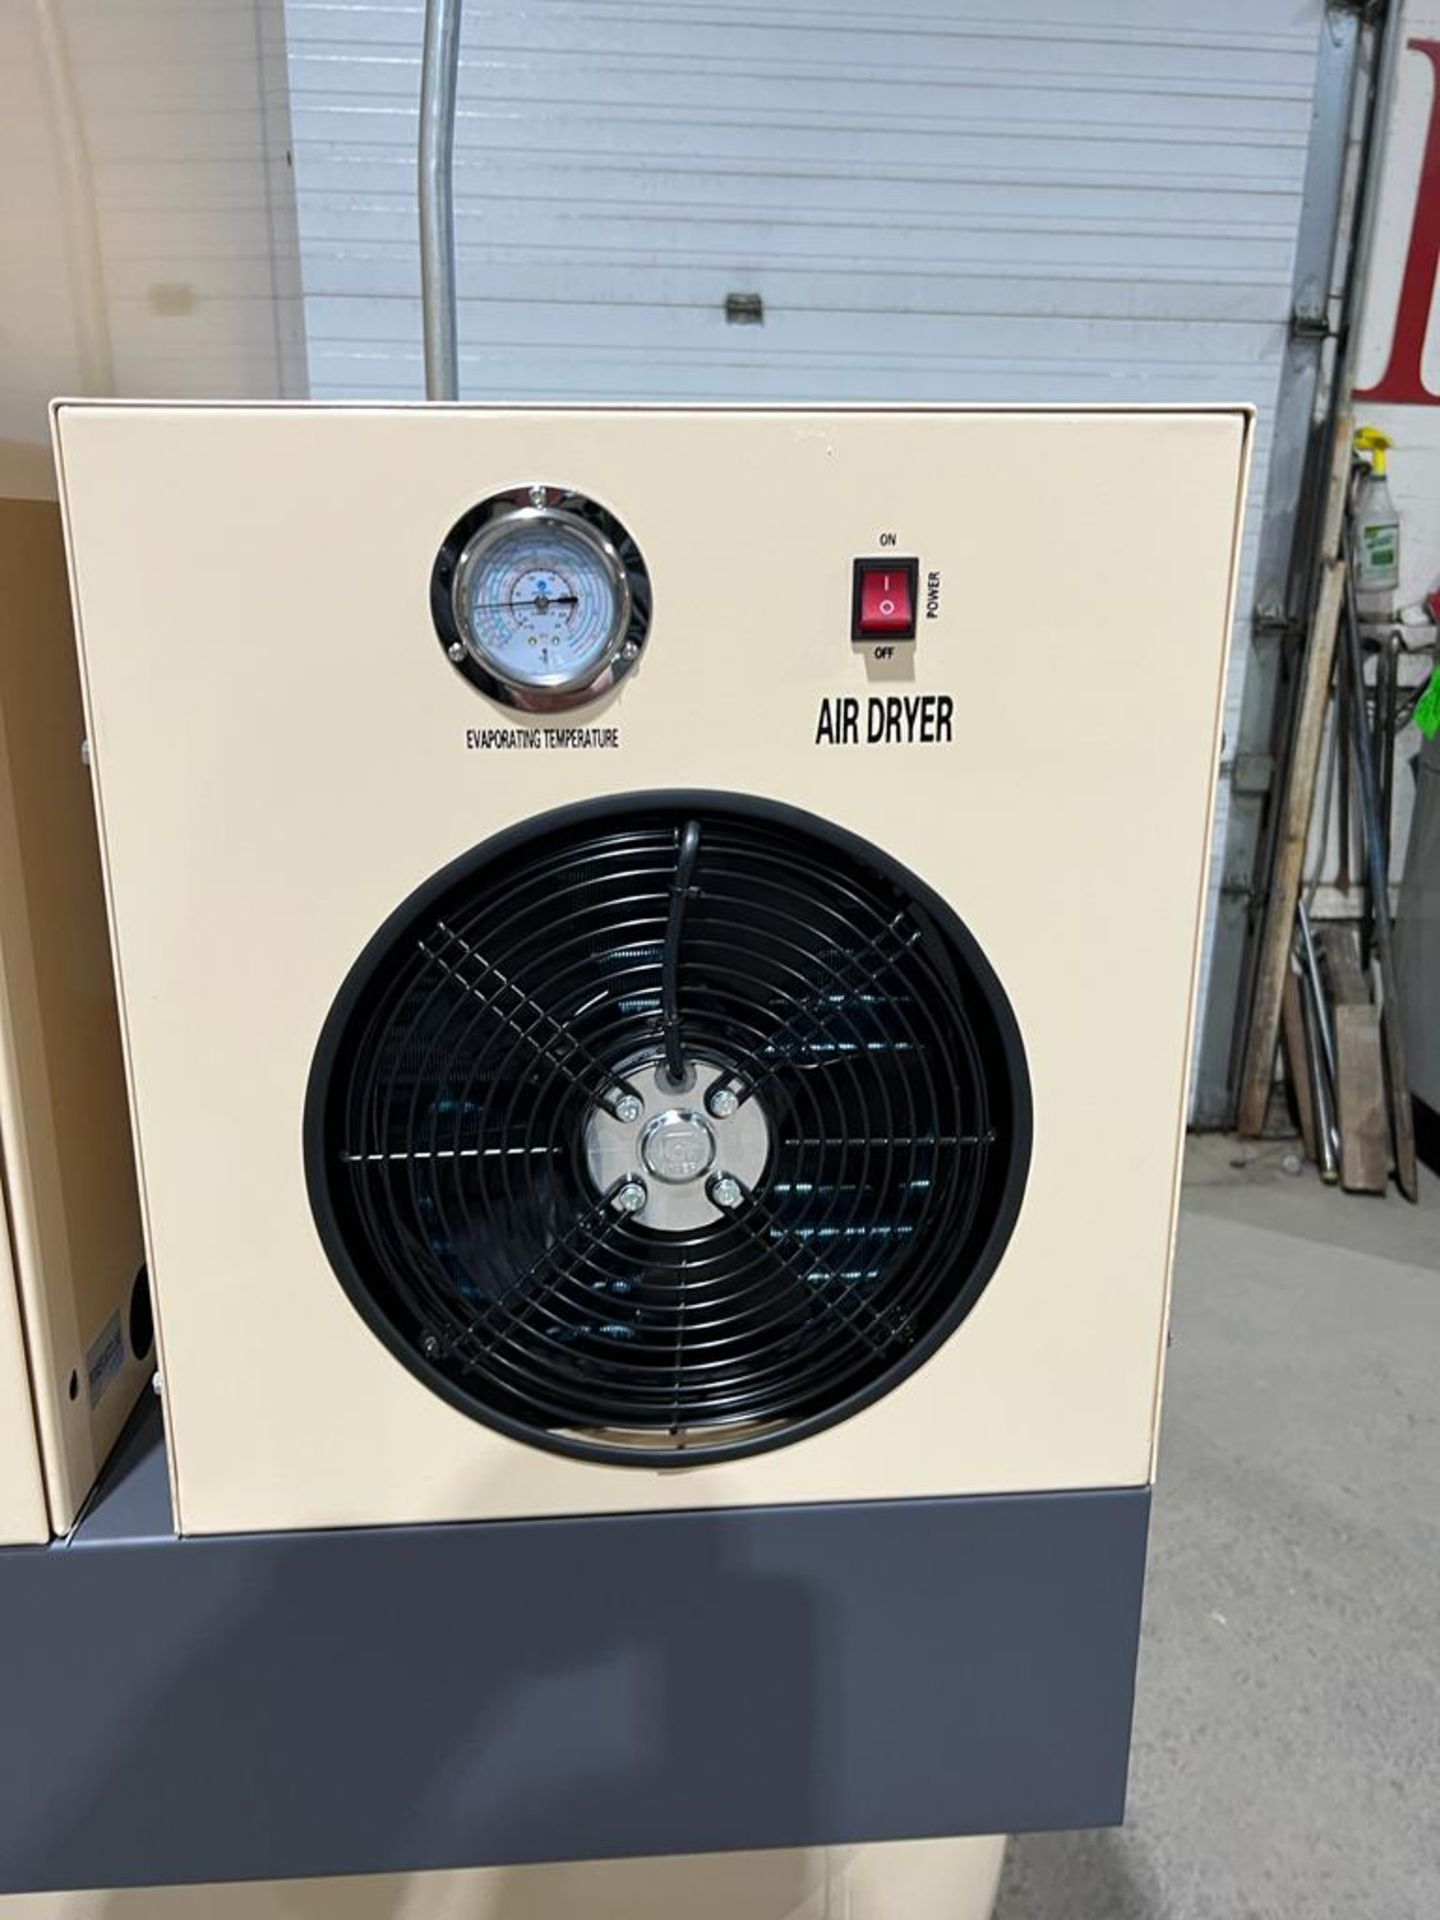 Pneu-Airtec model 20FF - 20HP Air Compressor with built on DRYER - MINT UNUSED COMPRESSOR with - Image 4 of 5